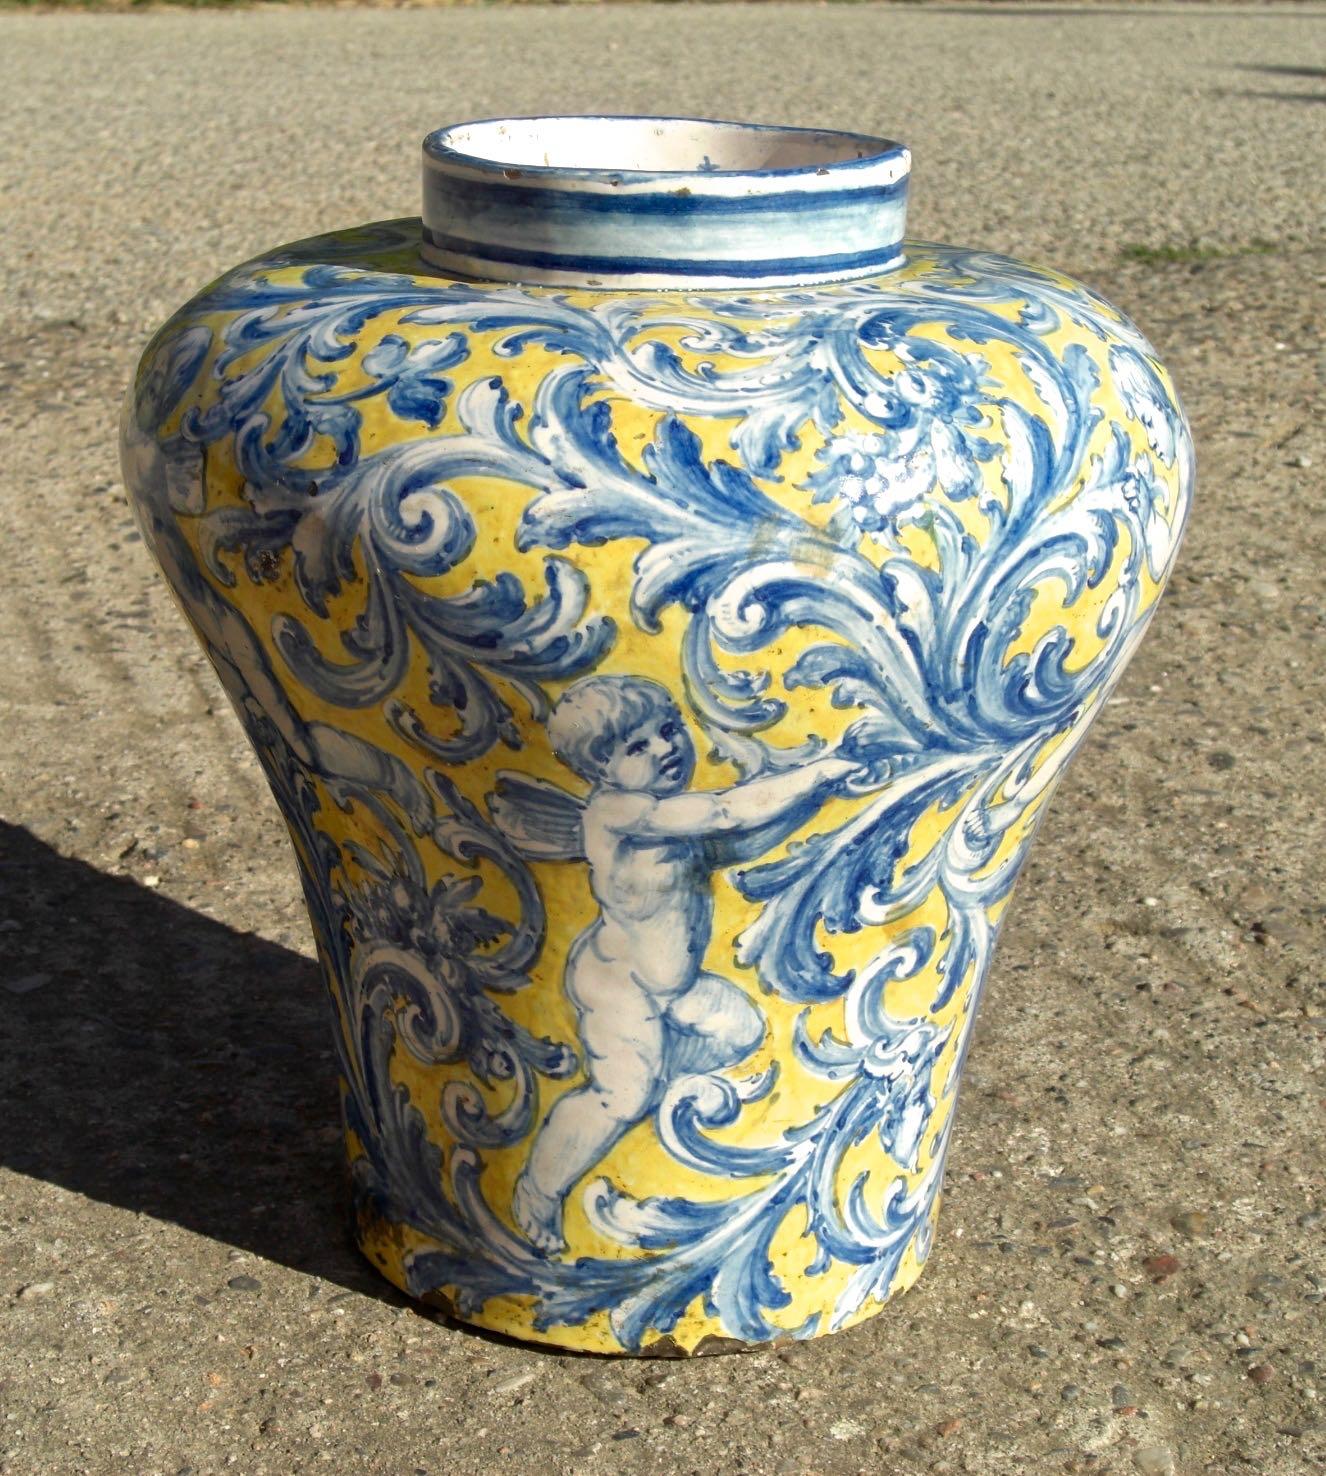 A beautifully preserved late 19th century painted majolica jar from Talavera de la Reina, Province of Toledo, in south-central Spain's Castile-La Mancha region, this piece was actually found in a magnificent private collection near Cordoba, Spain.